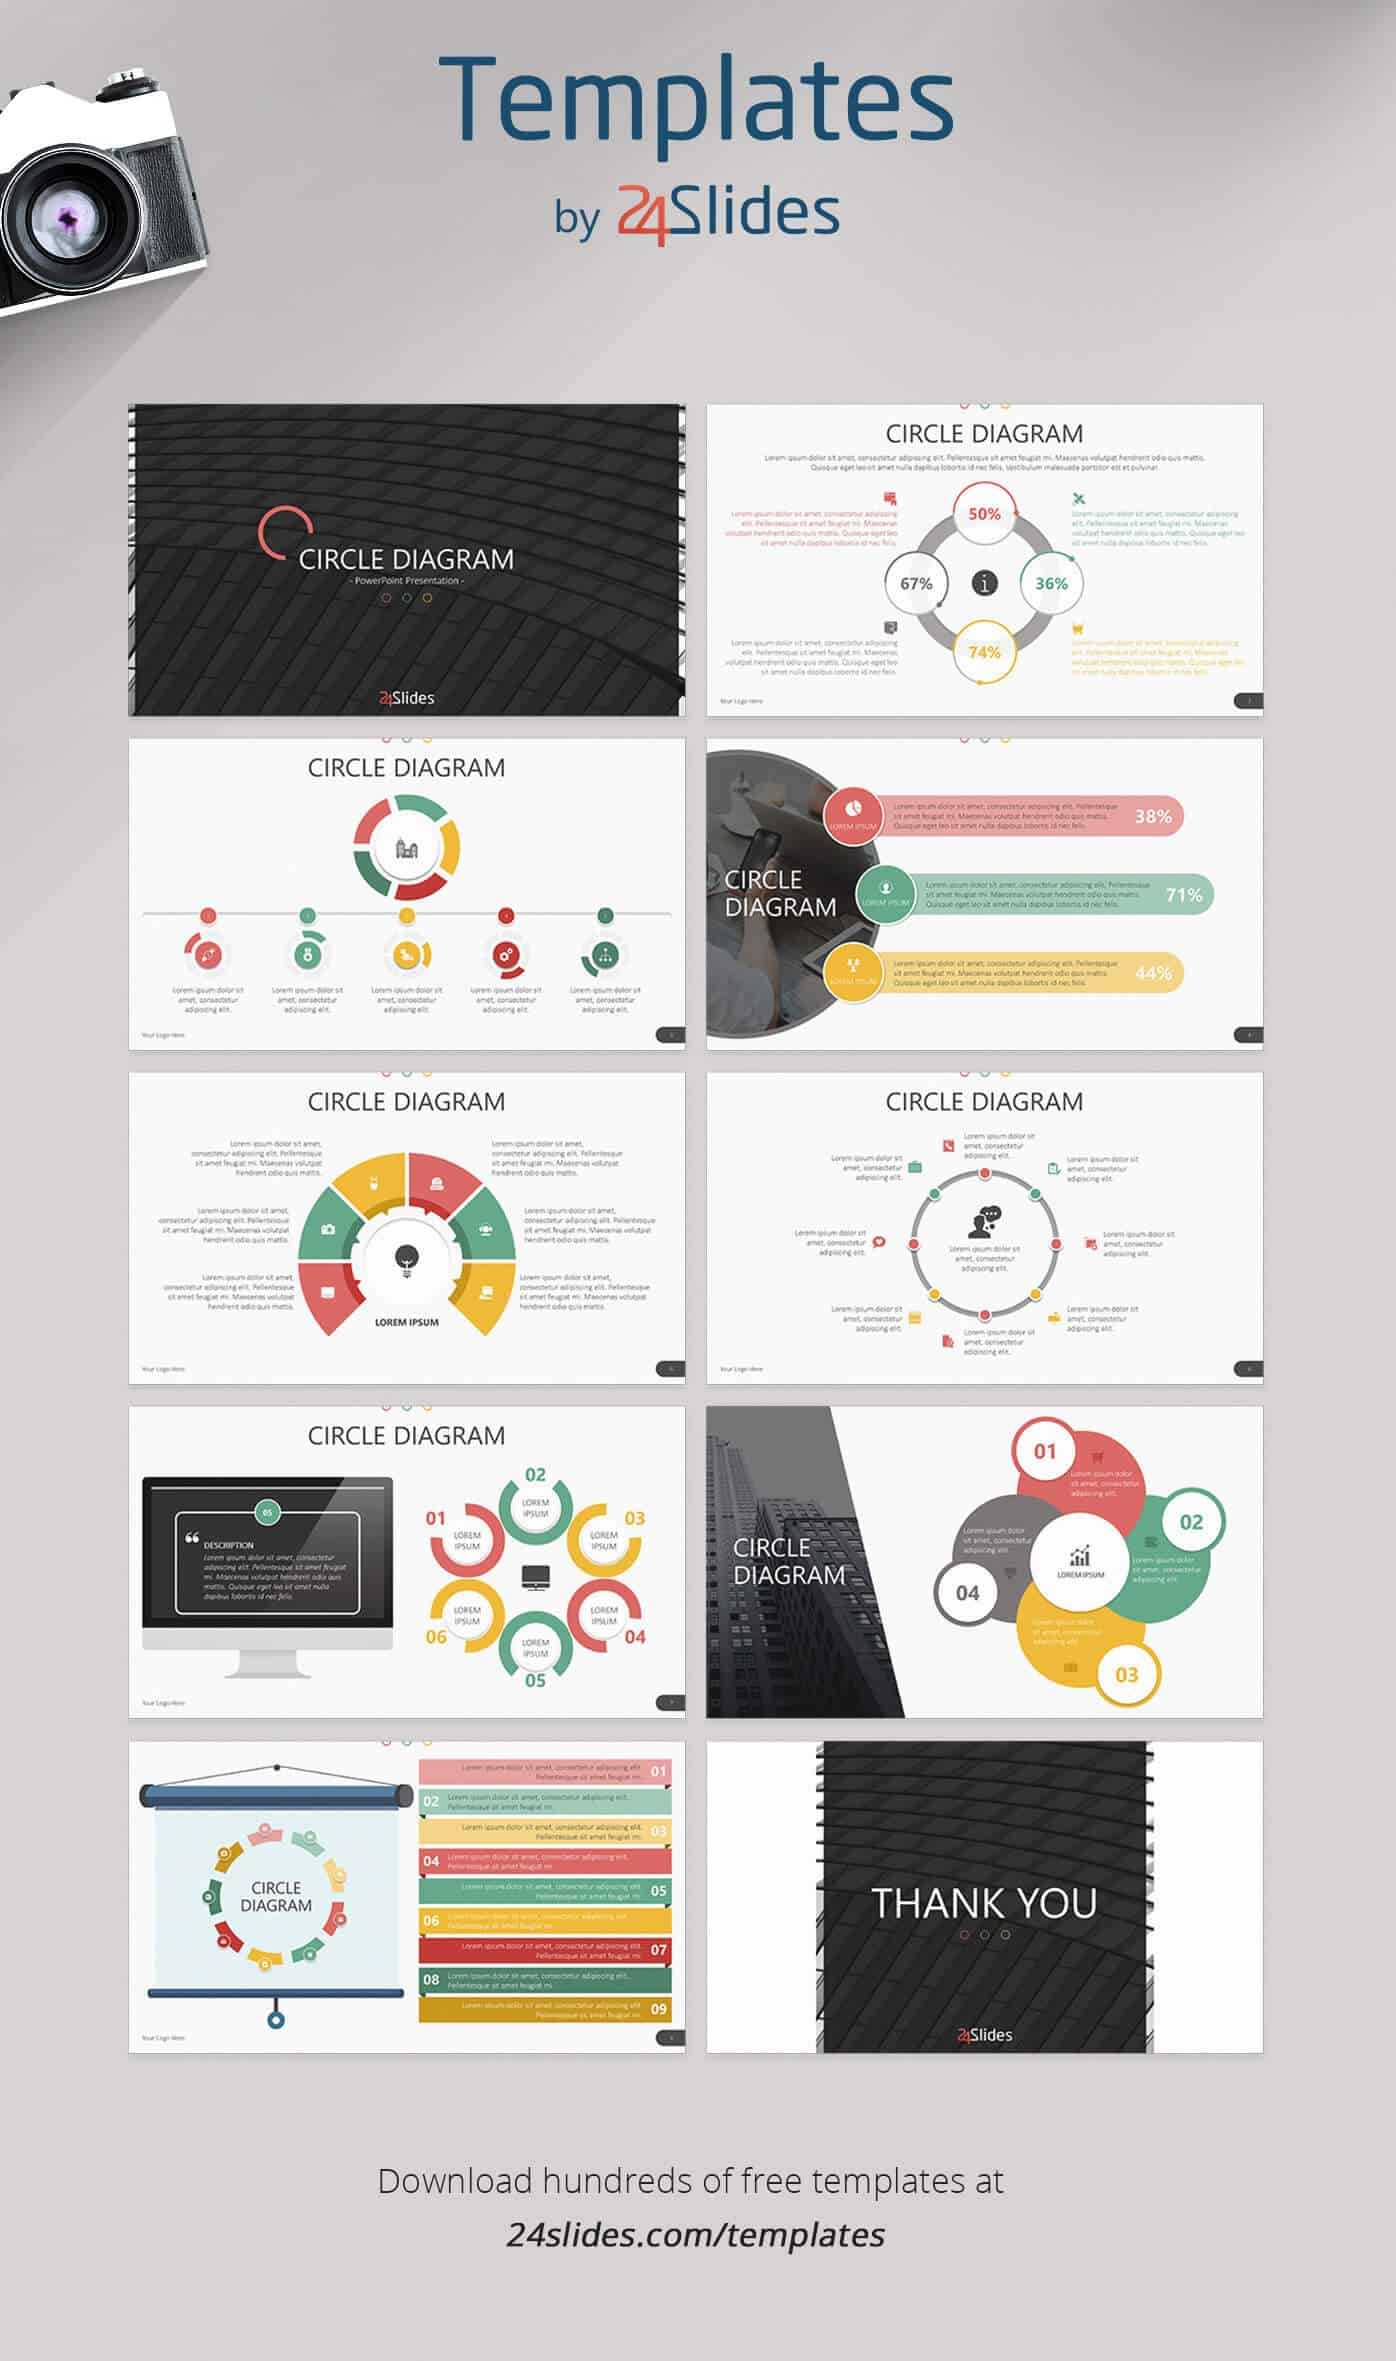 15 Fun And Colorful Free Powerpoint Templates | Present Better Intended For Powerpoint Slides Design Templates For Free